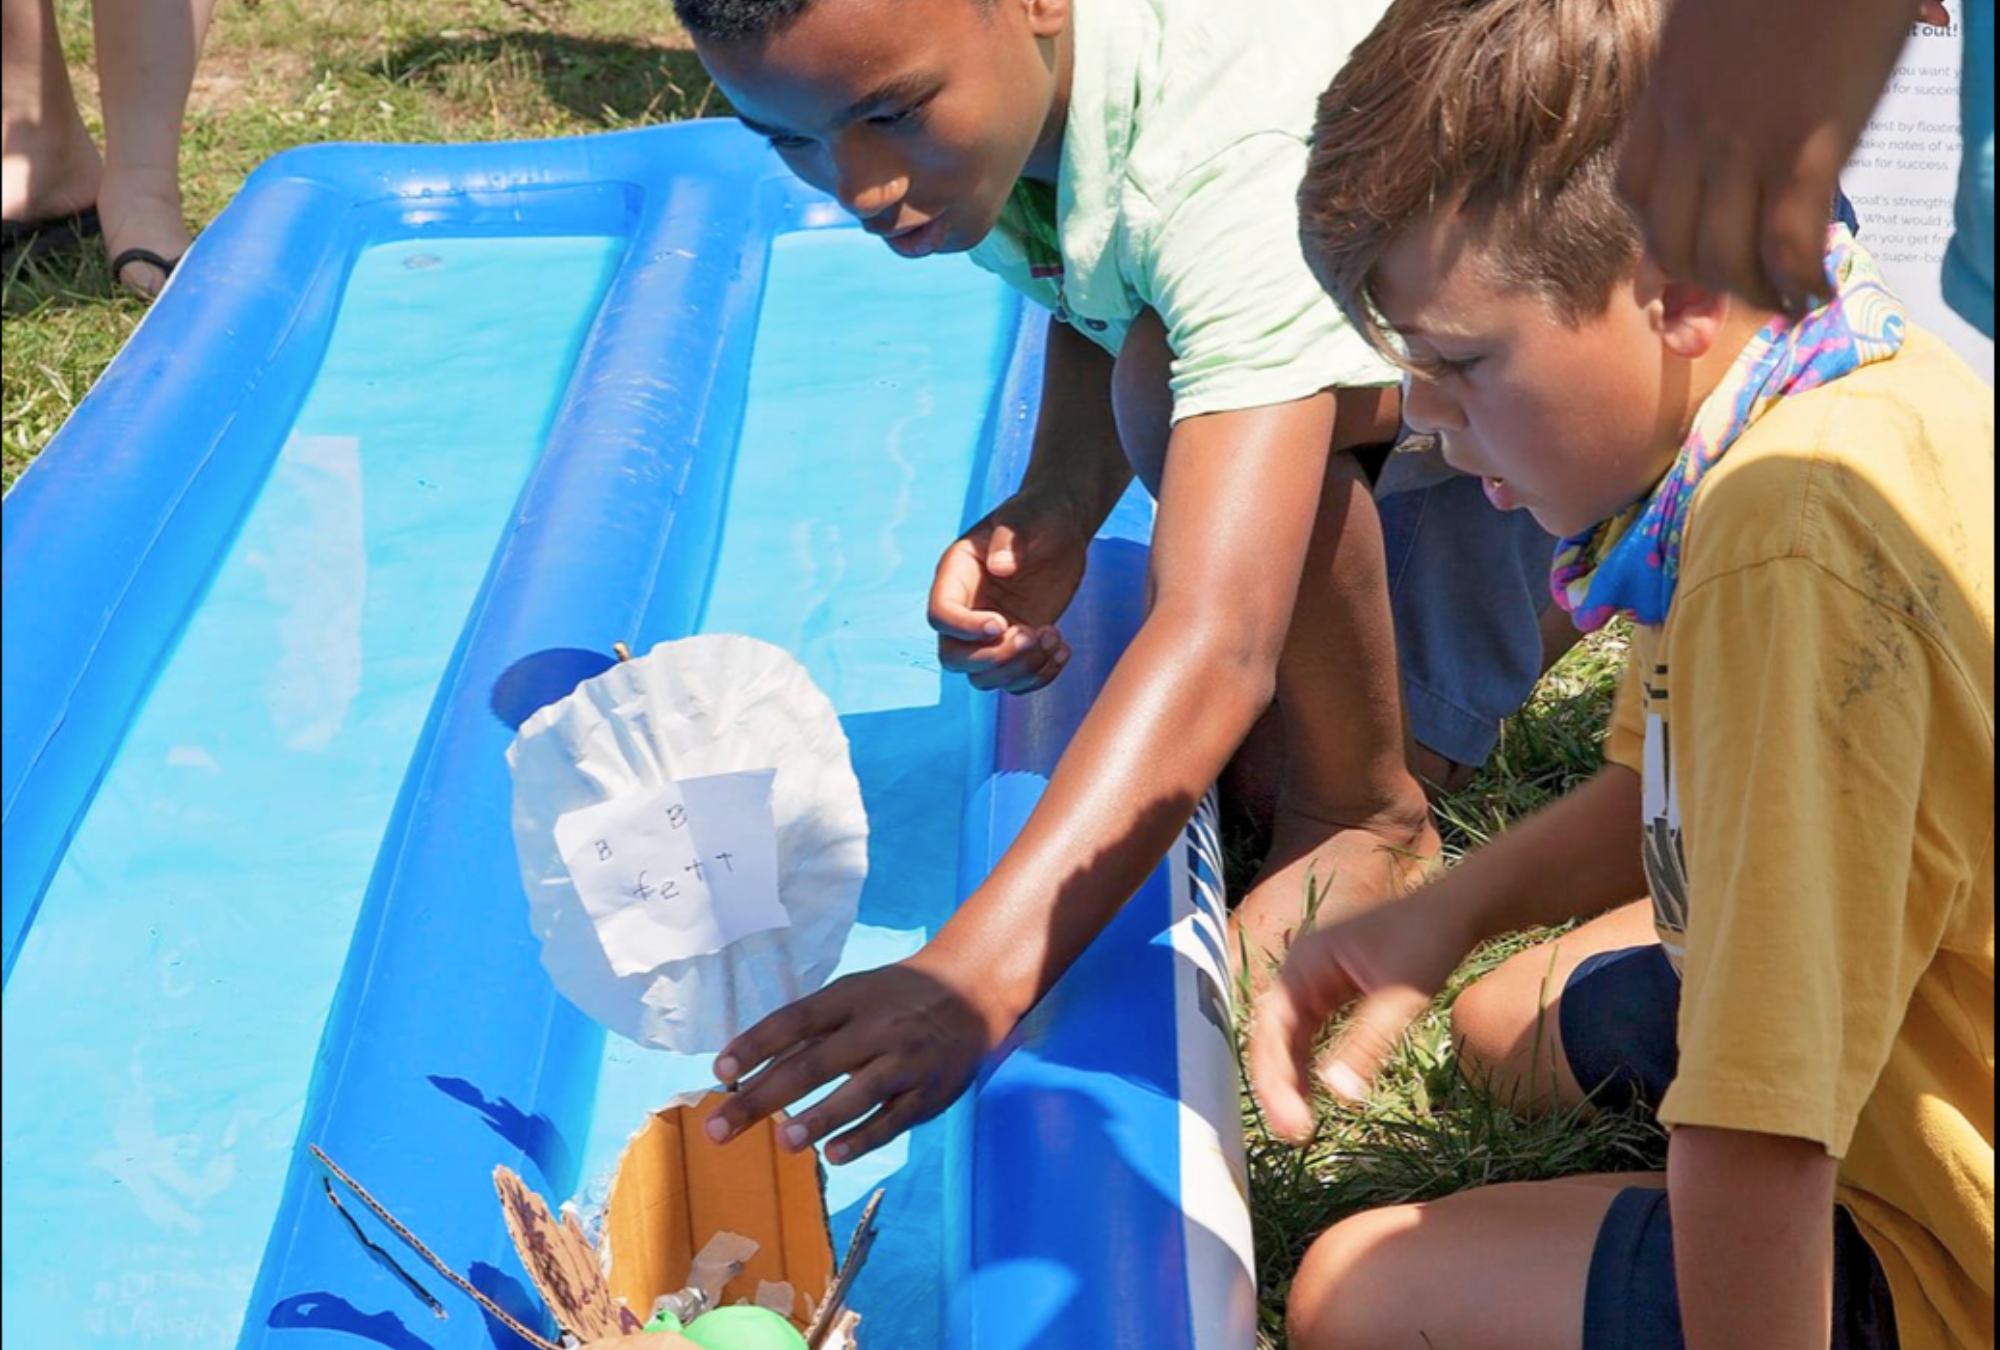 Boys test the toy boat they build through a STEM experiment